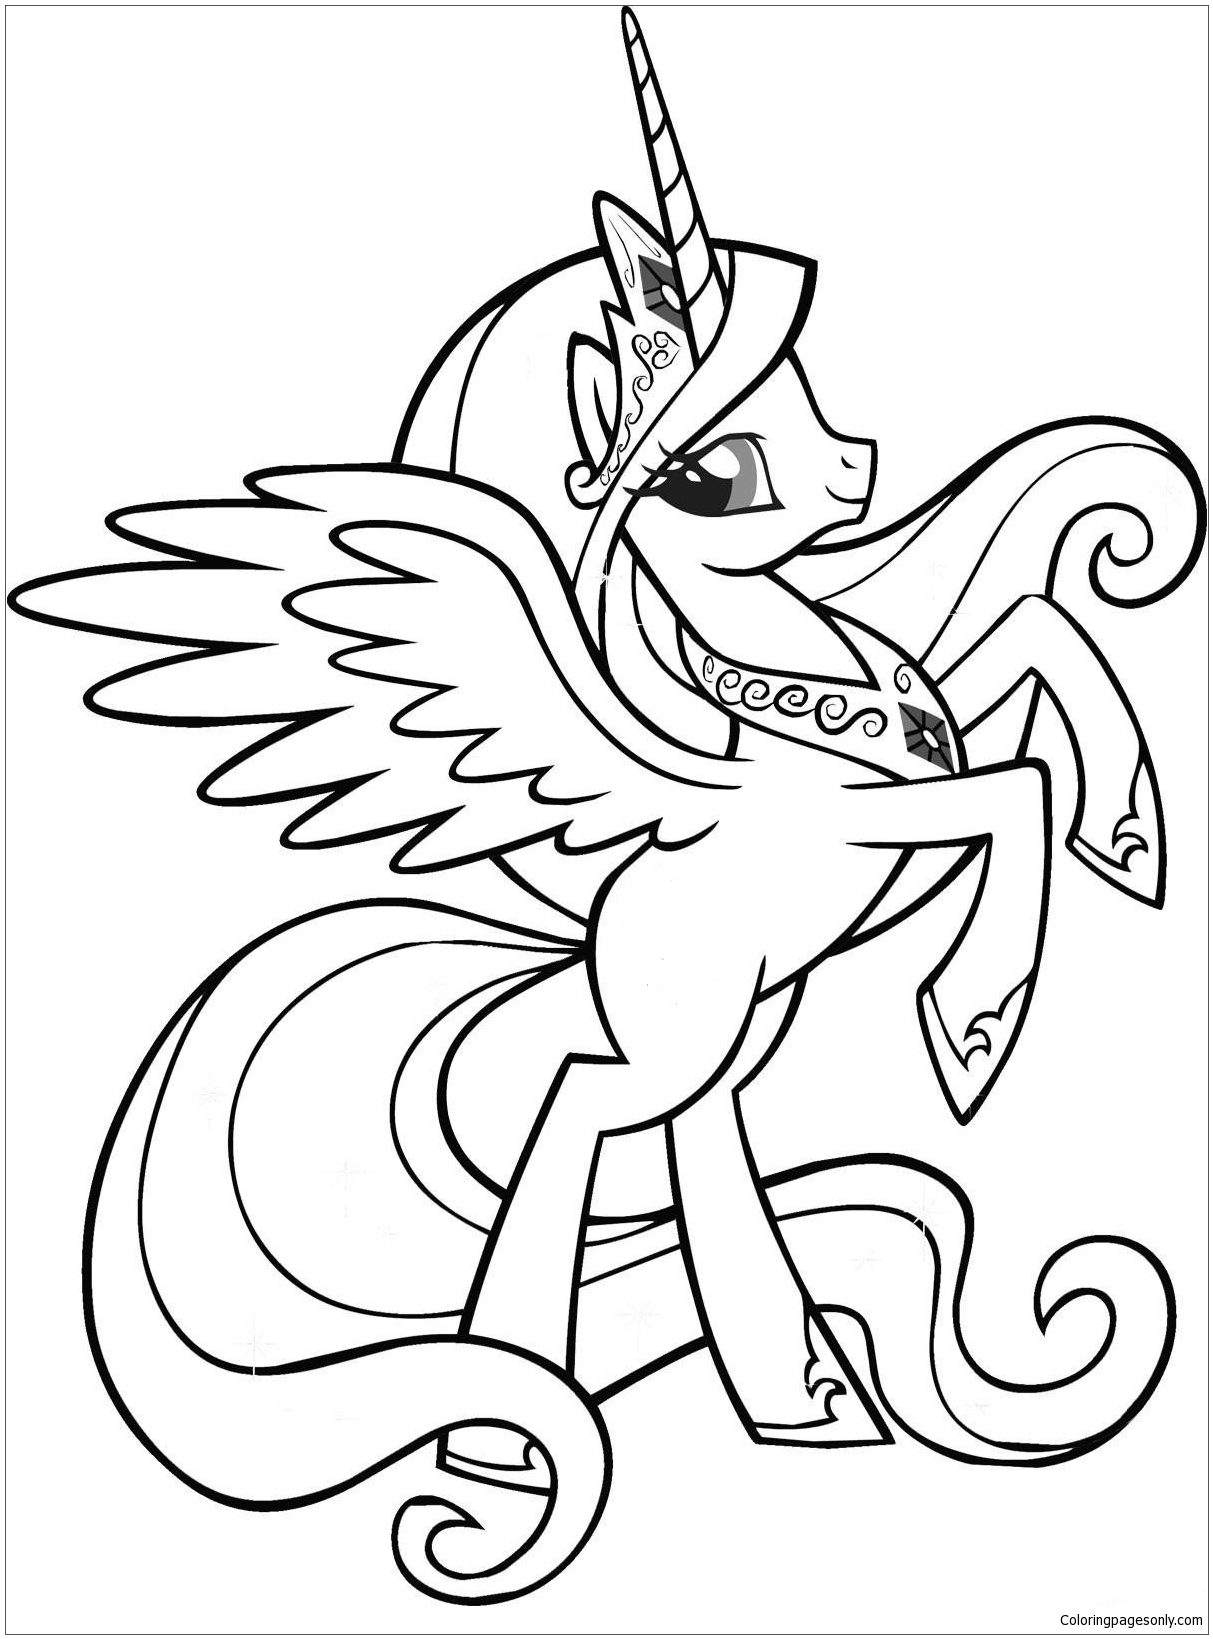 Download Cute Unicorn-image 4 Coloring Page - Free Coloring Pages Online